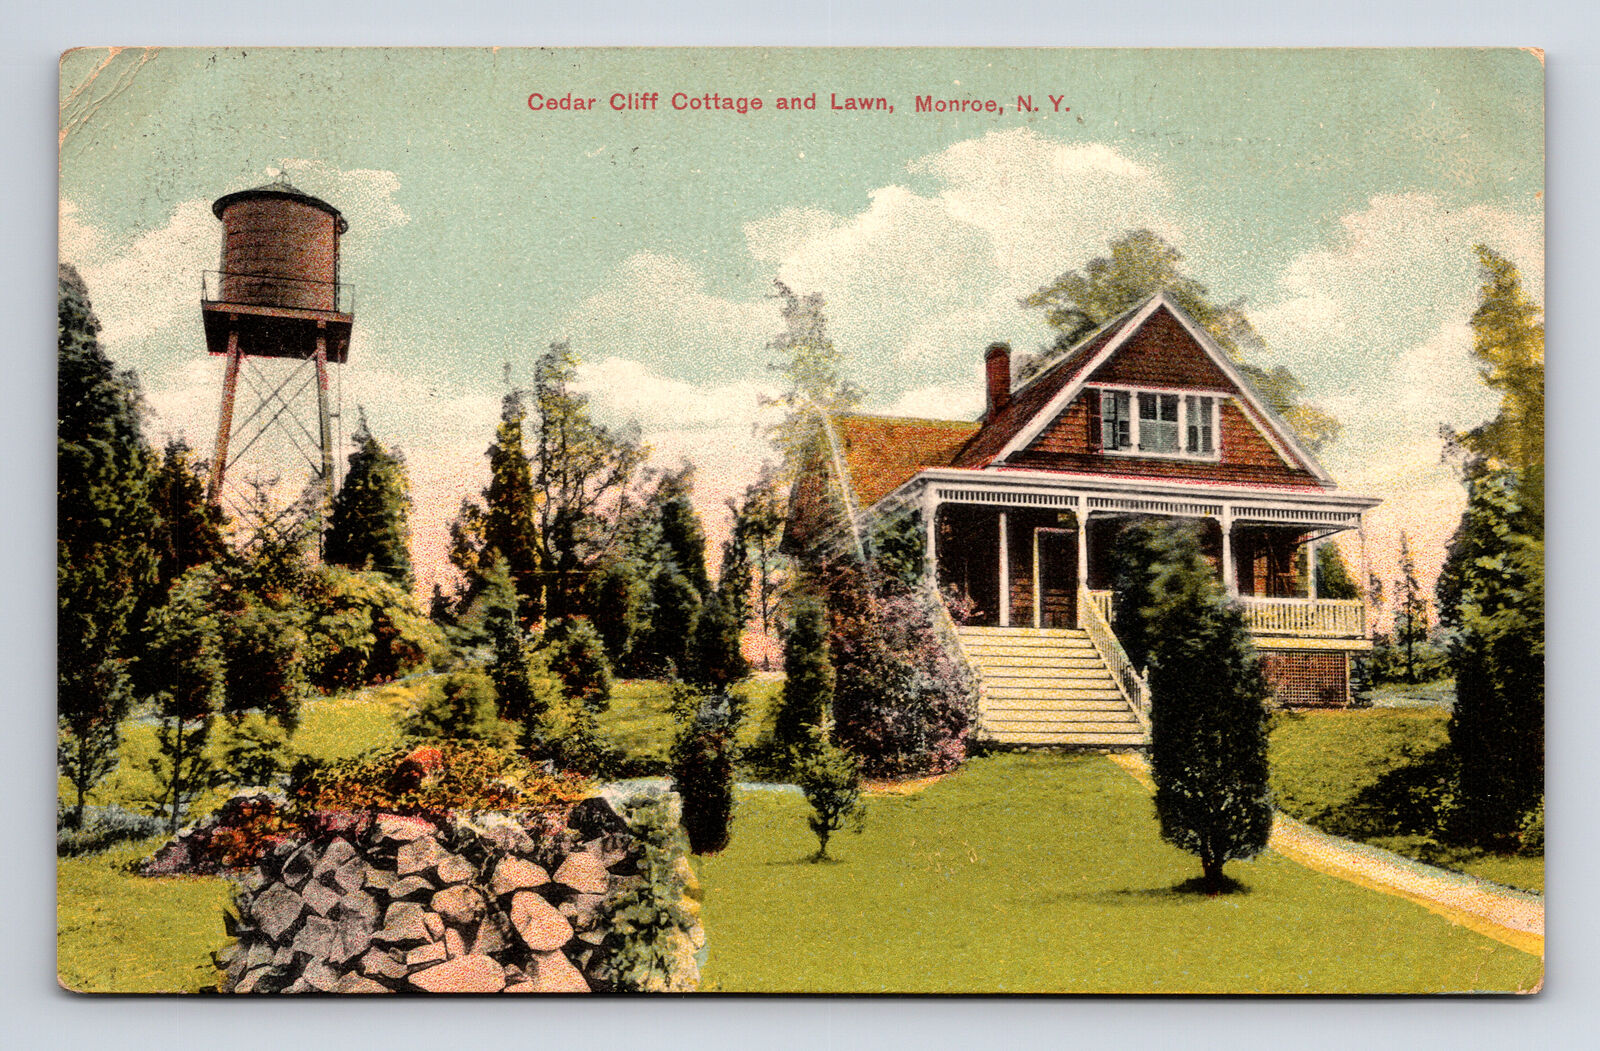 Cedar Cliff Cottage & Lawn Water Tower Well Monroe NY Rogers Drug Store Postcard